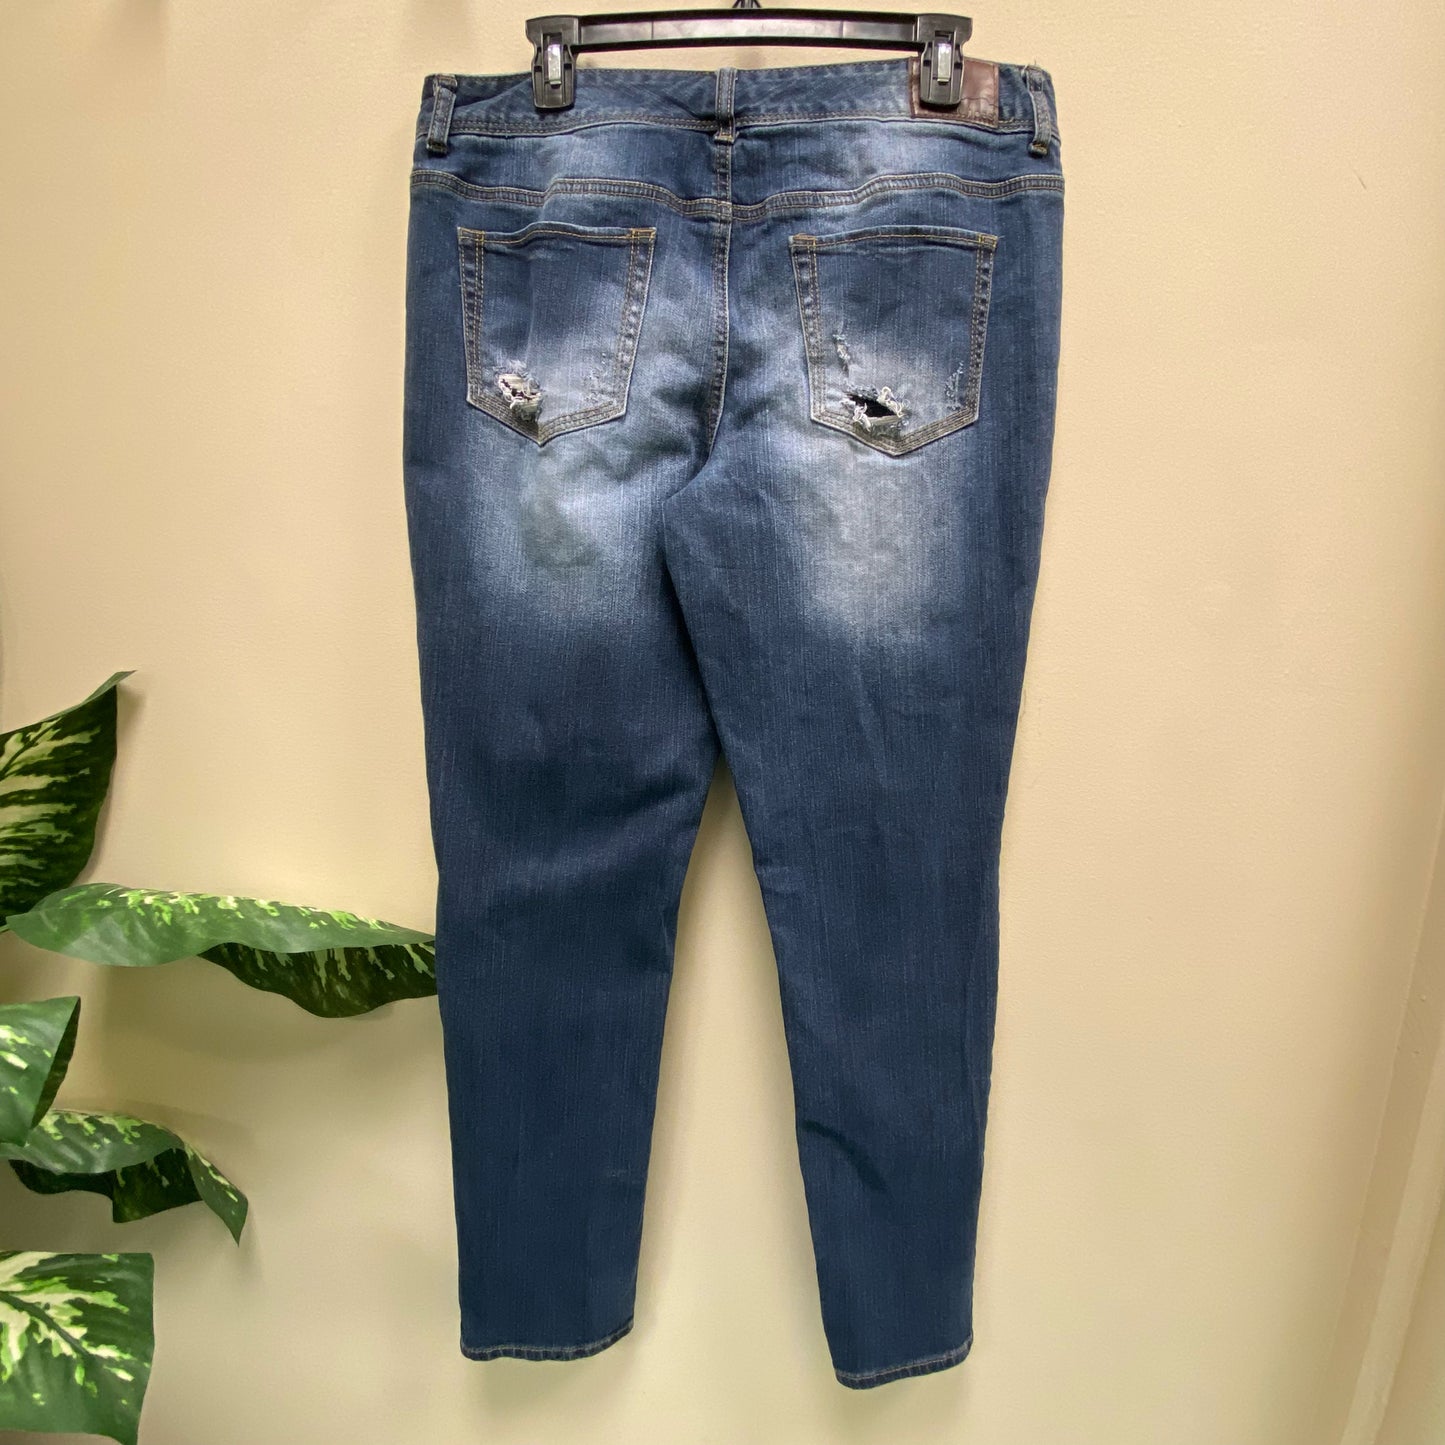 Maurices Jeans - Size 11/12